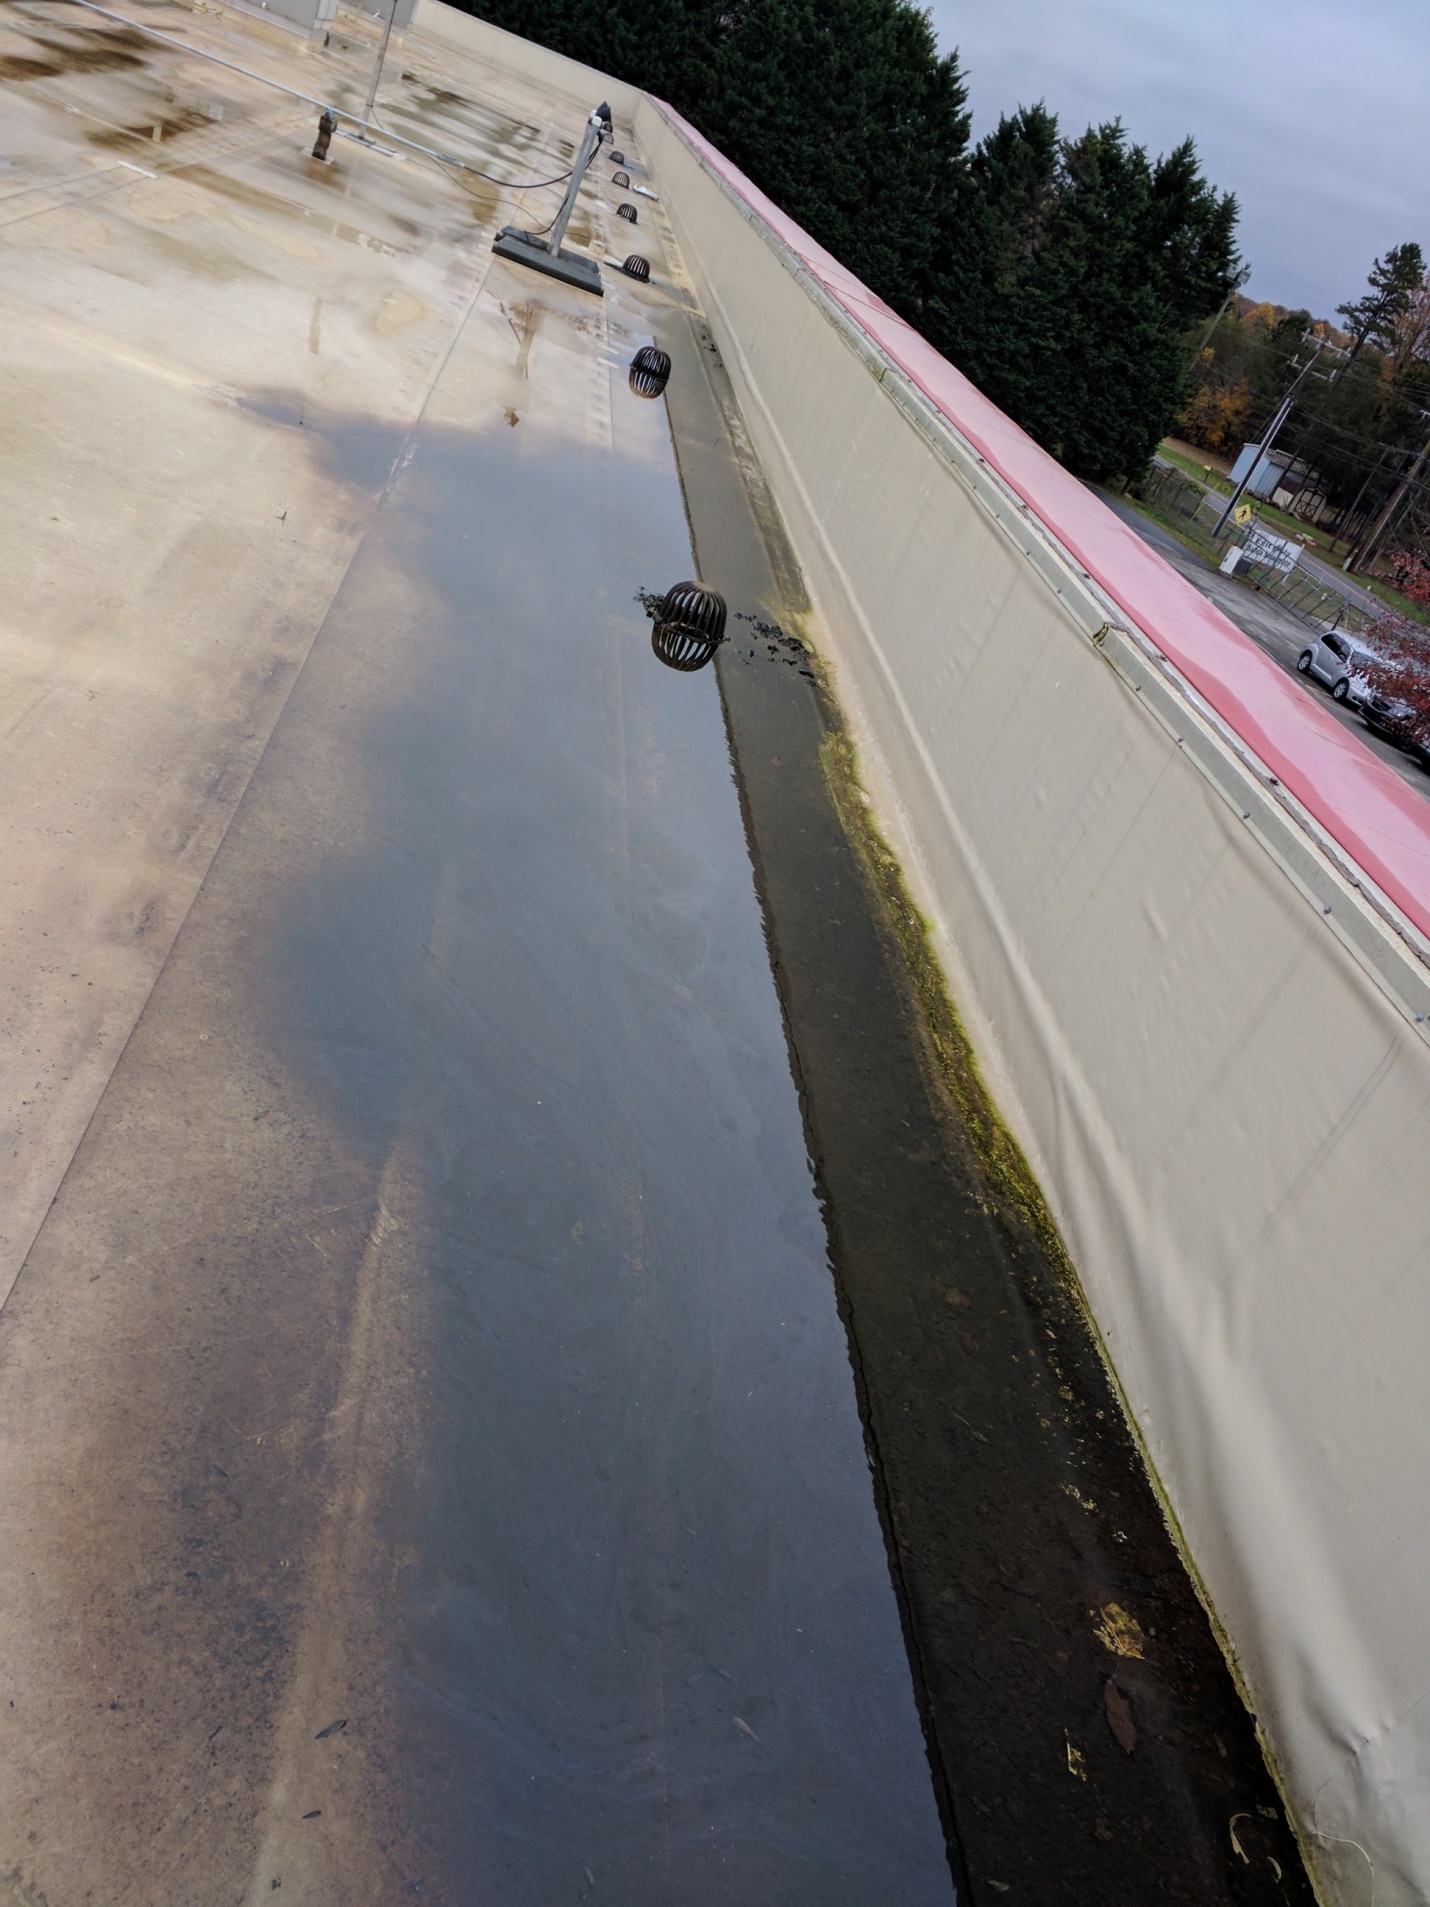 Ponding-water-on-roof-due-to-clogged-drain